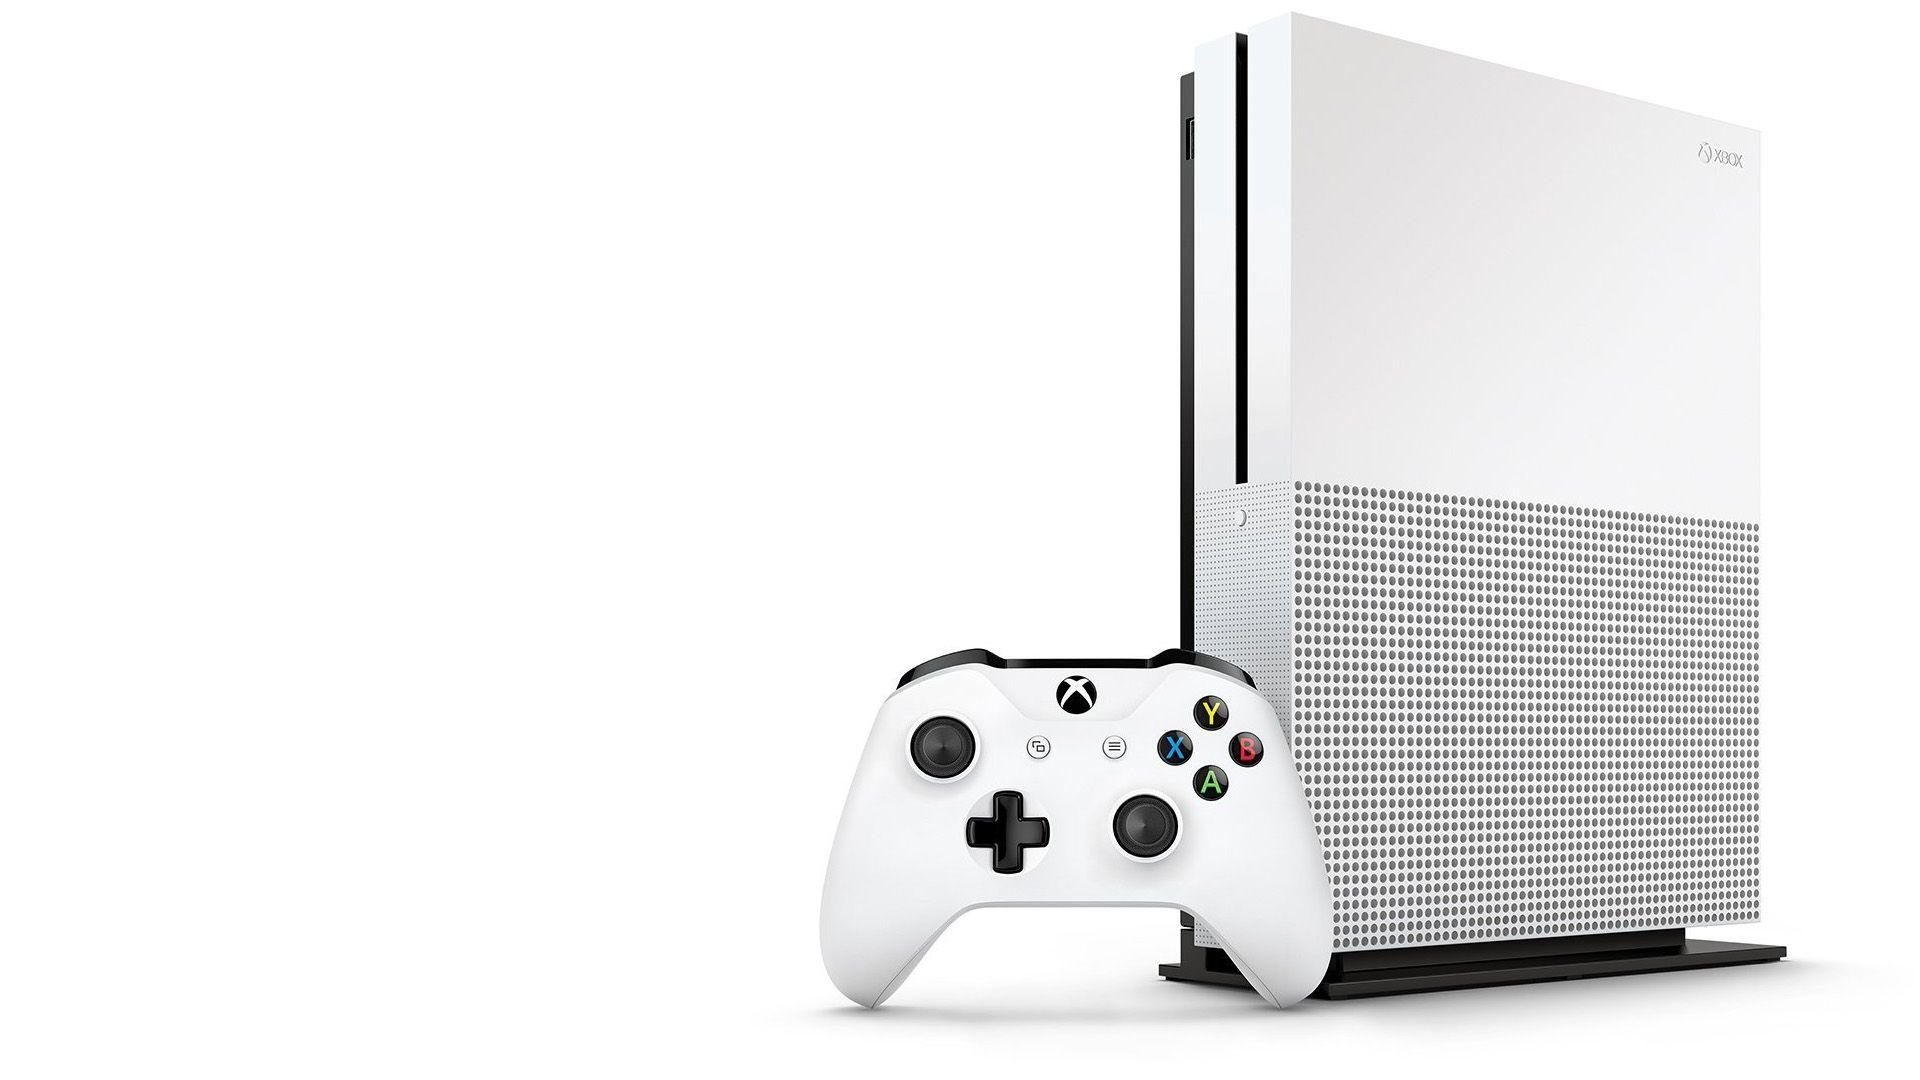 Microsoft is offering a killer Black Friday deal on the Xbox One S